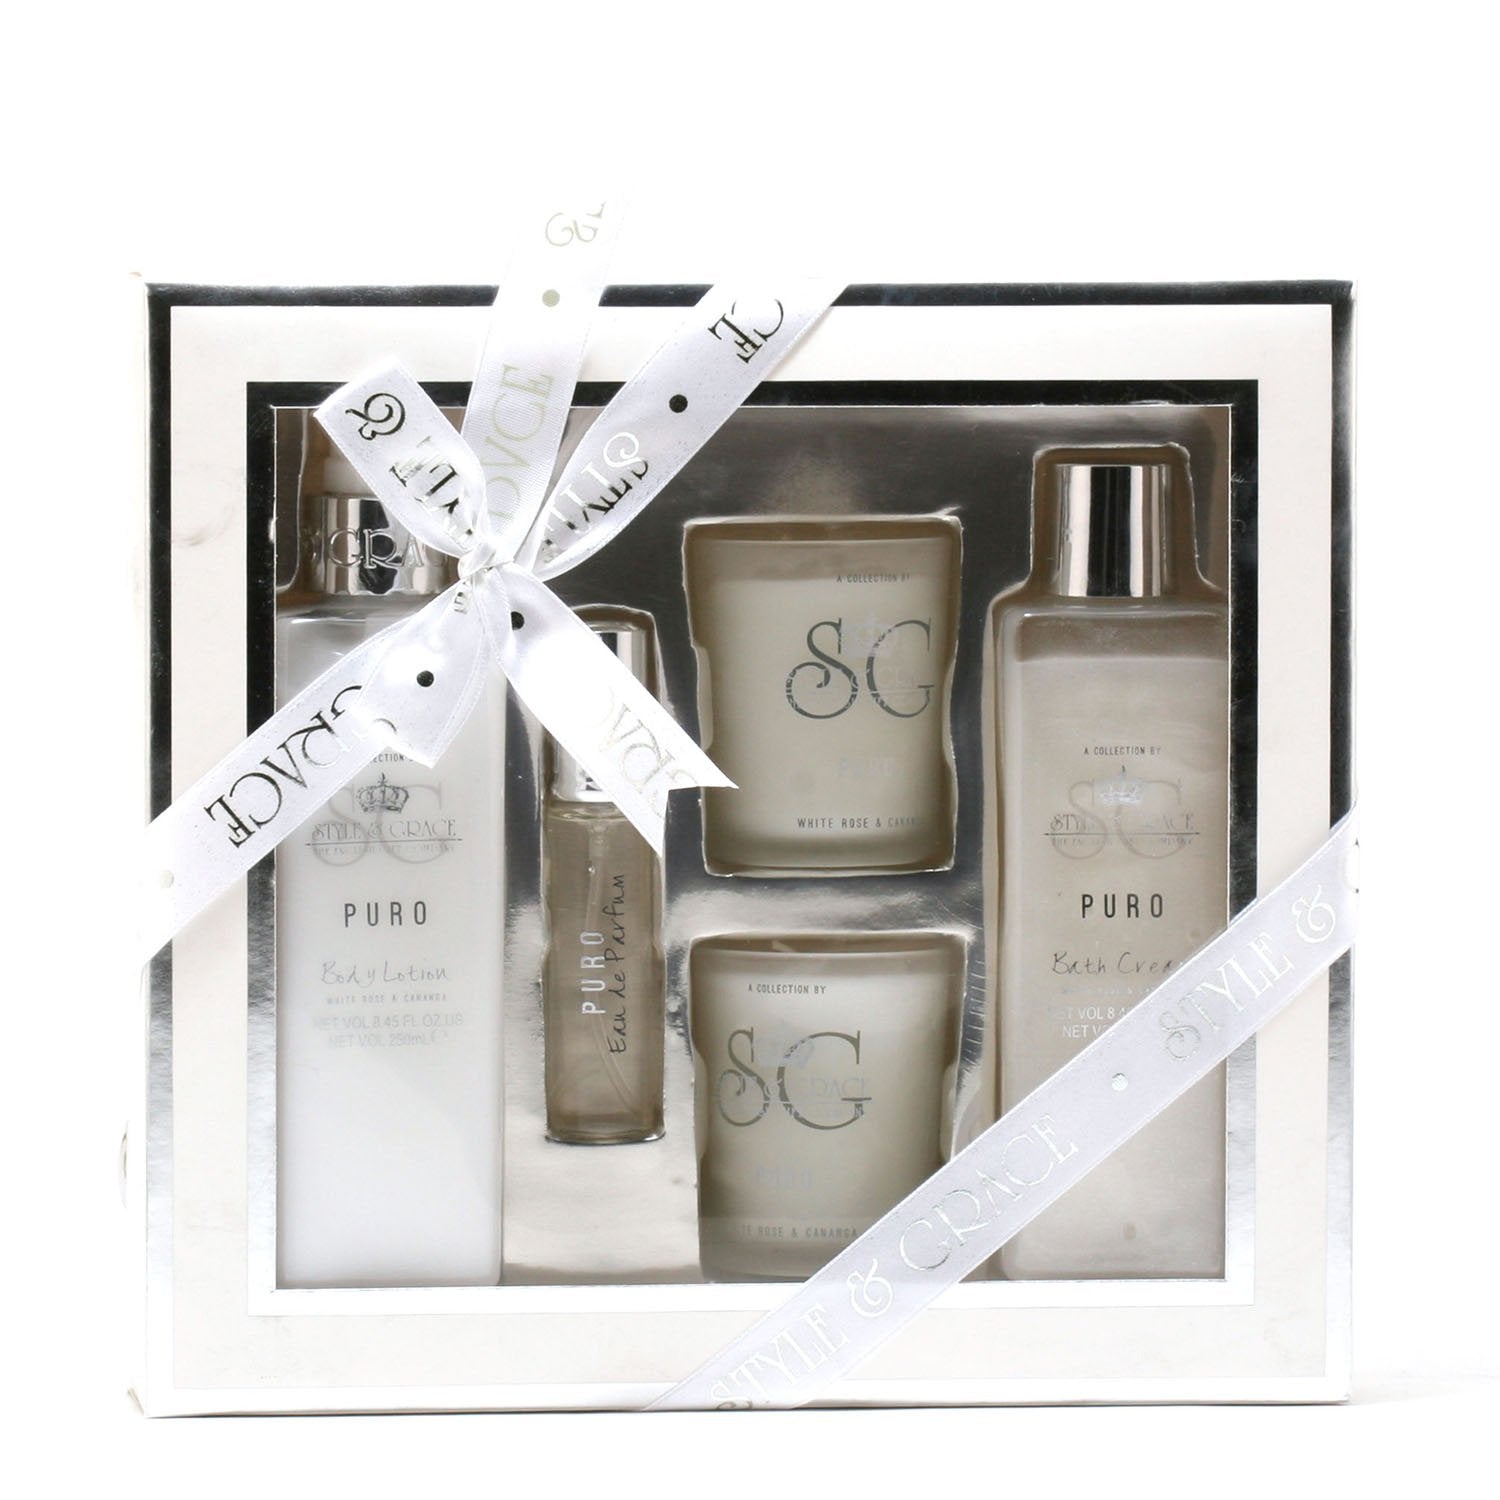 PURO TRANQUIL BY STYLE & GRACE - BATH EXPERIENCE GIFT SET